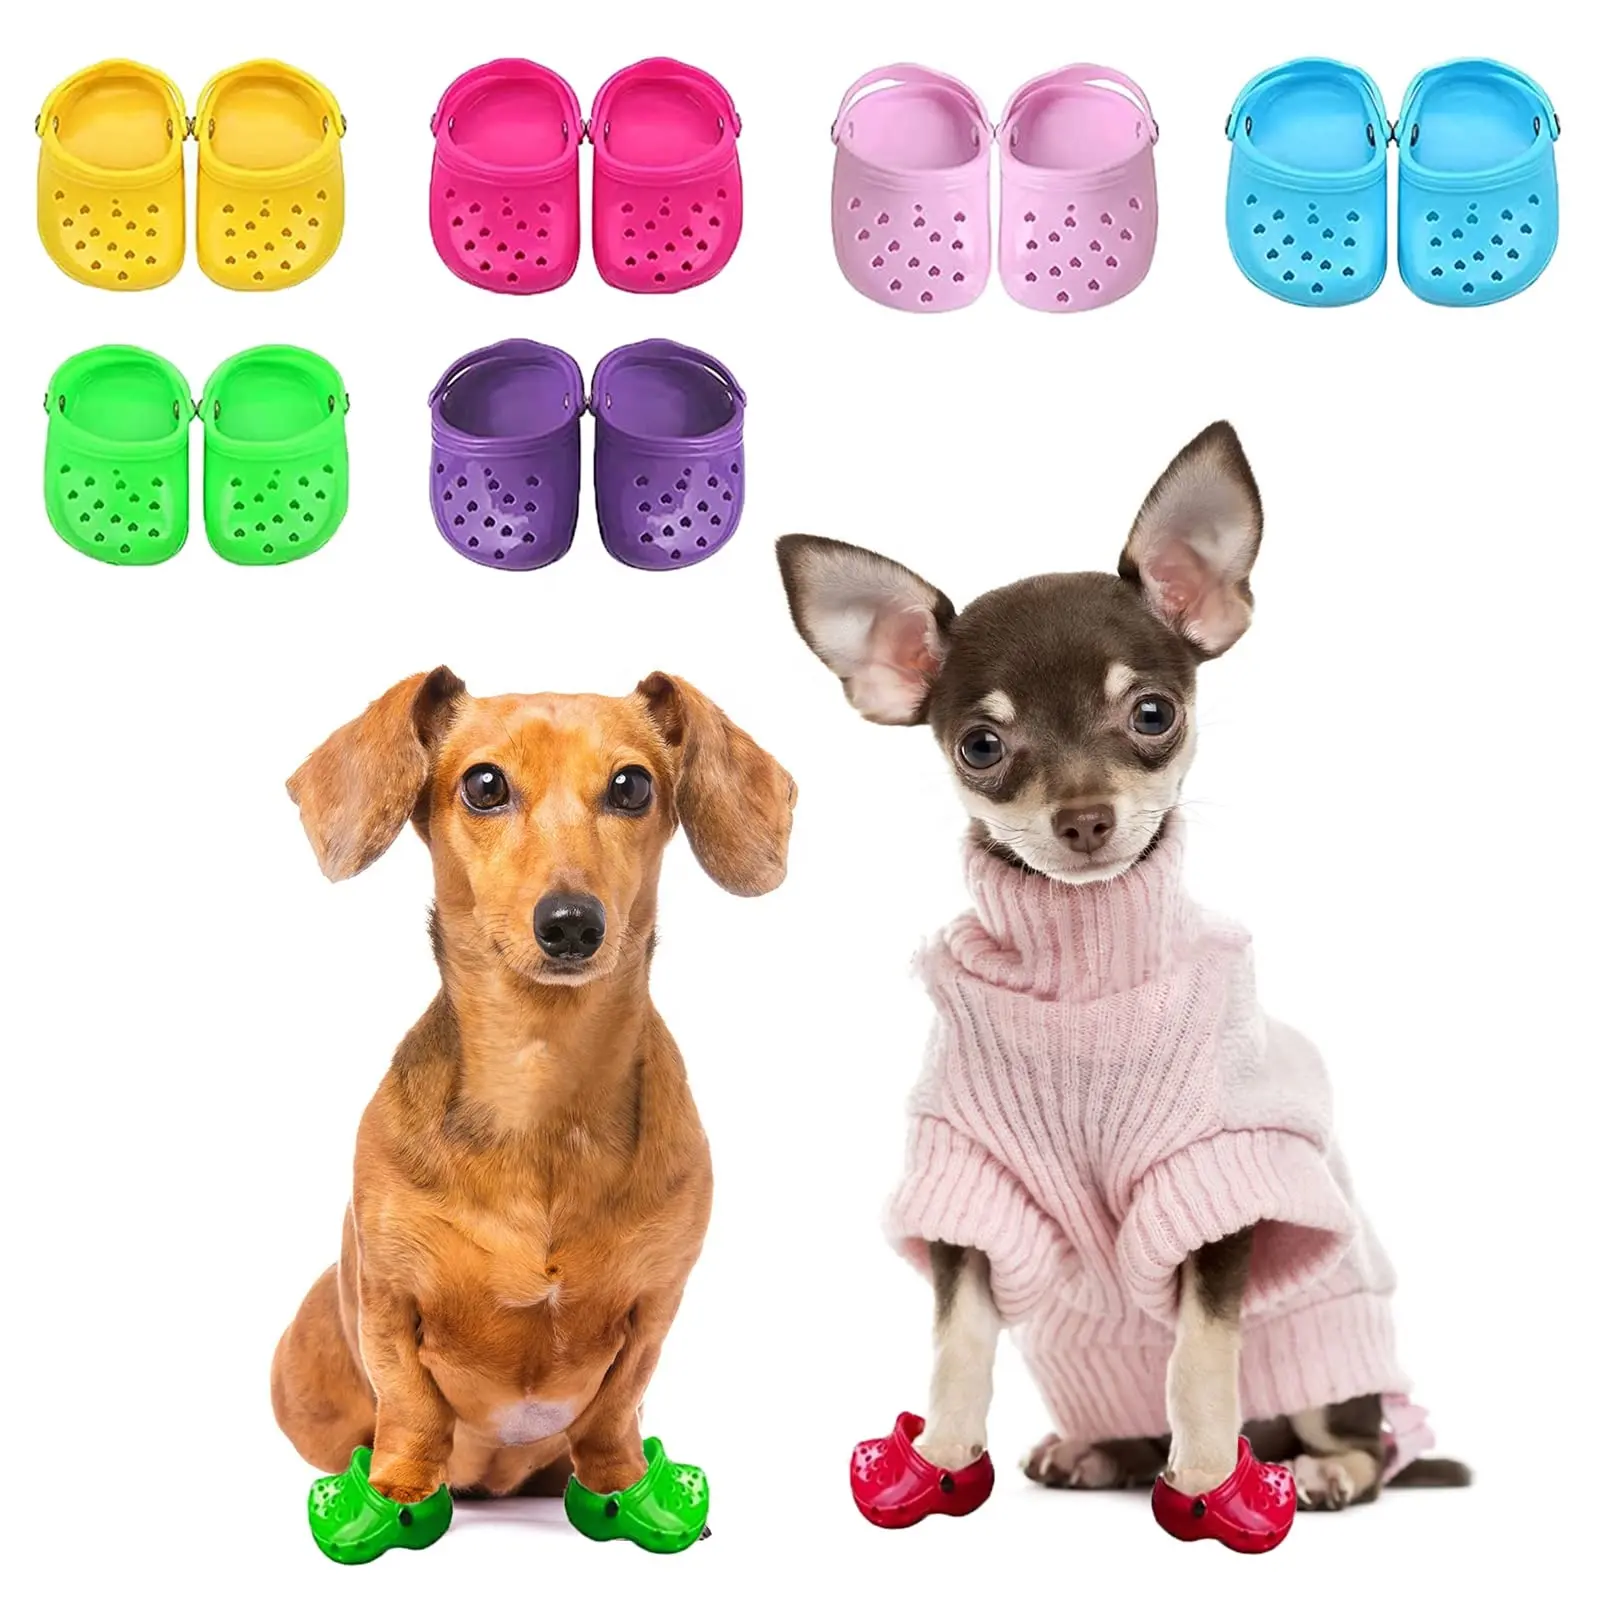 2022 TikTok Hot Selling Pet Dog Shoes Dog Croc Breathable Summer Sandals for Taking Pictures of Dogs